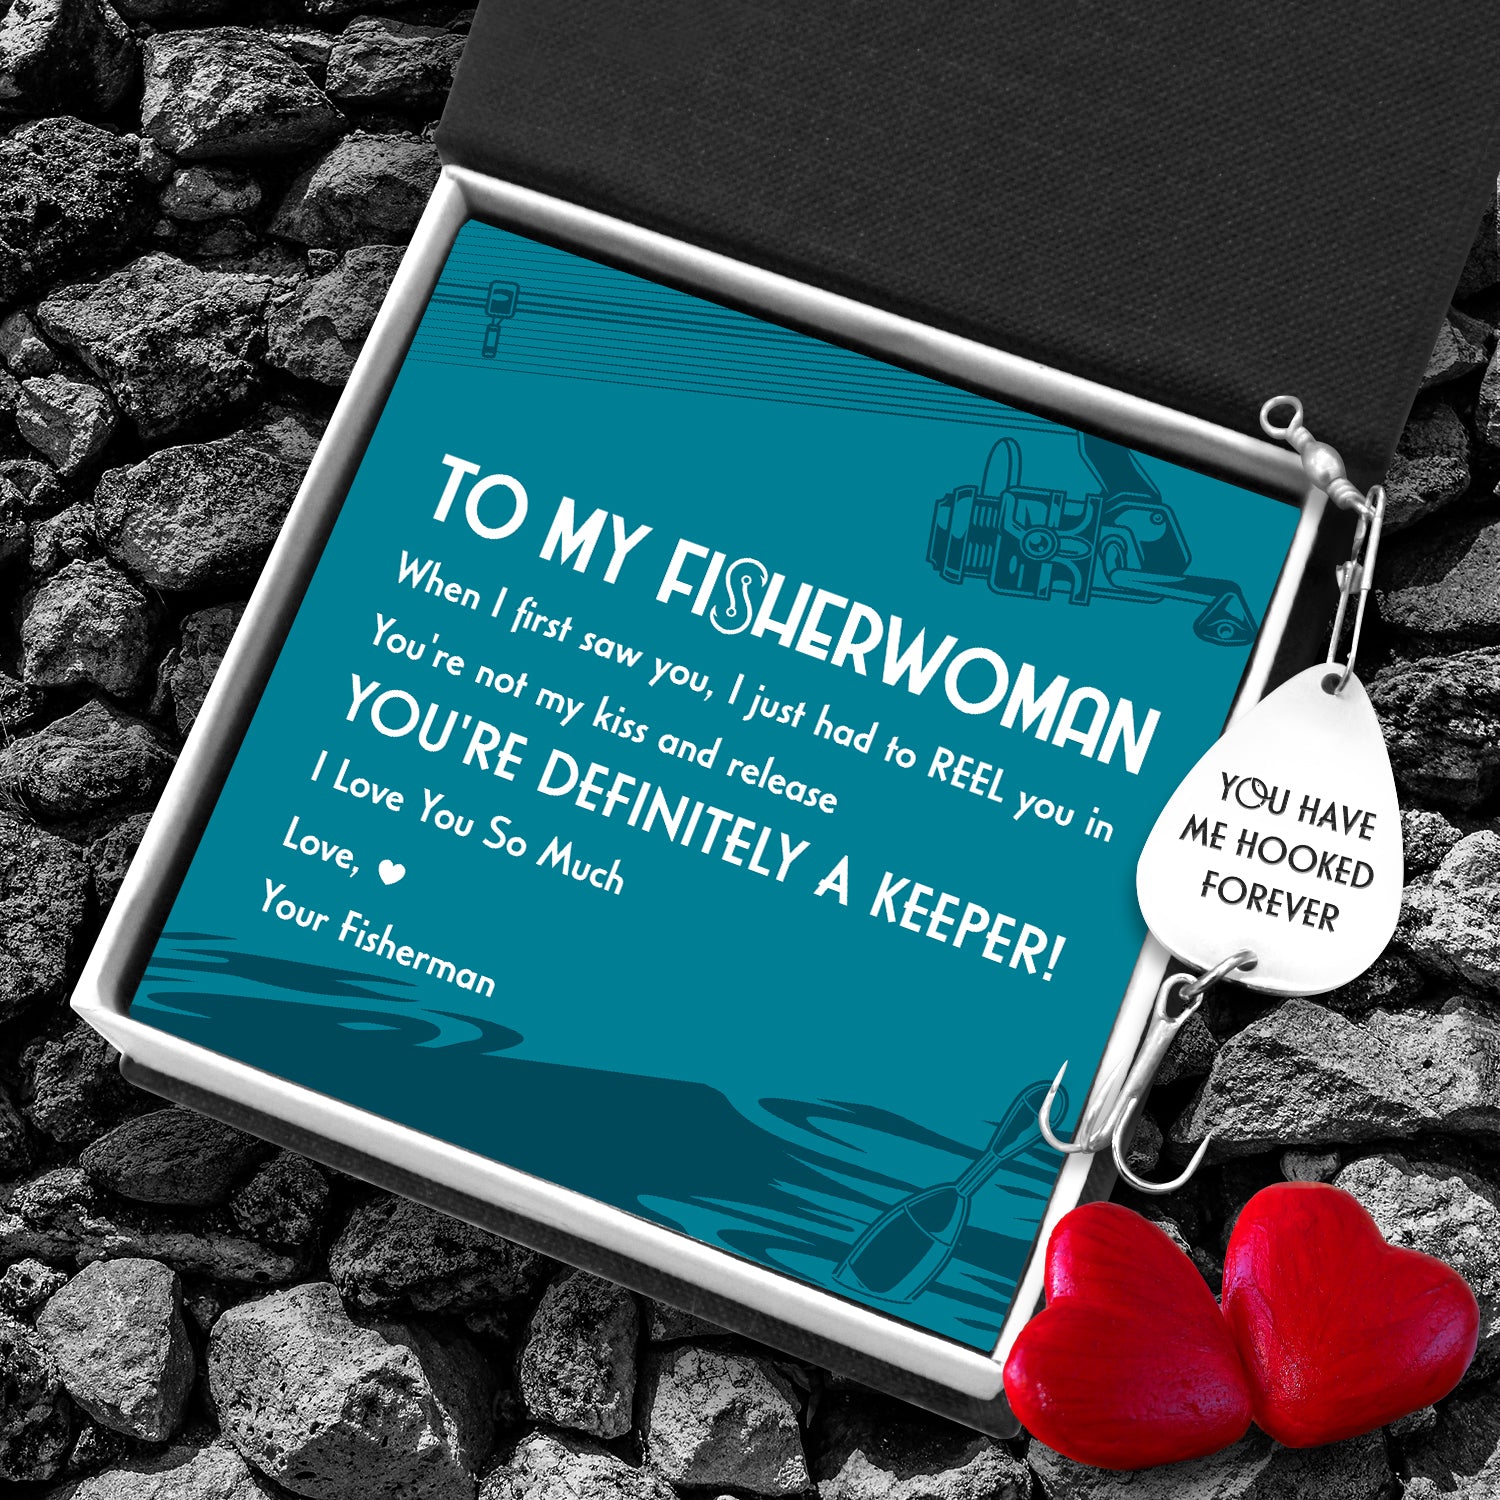 Engraved Fishing Hook - Fishing - To My Fisherwoman - I Love You So Much - Ukgfa13010